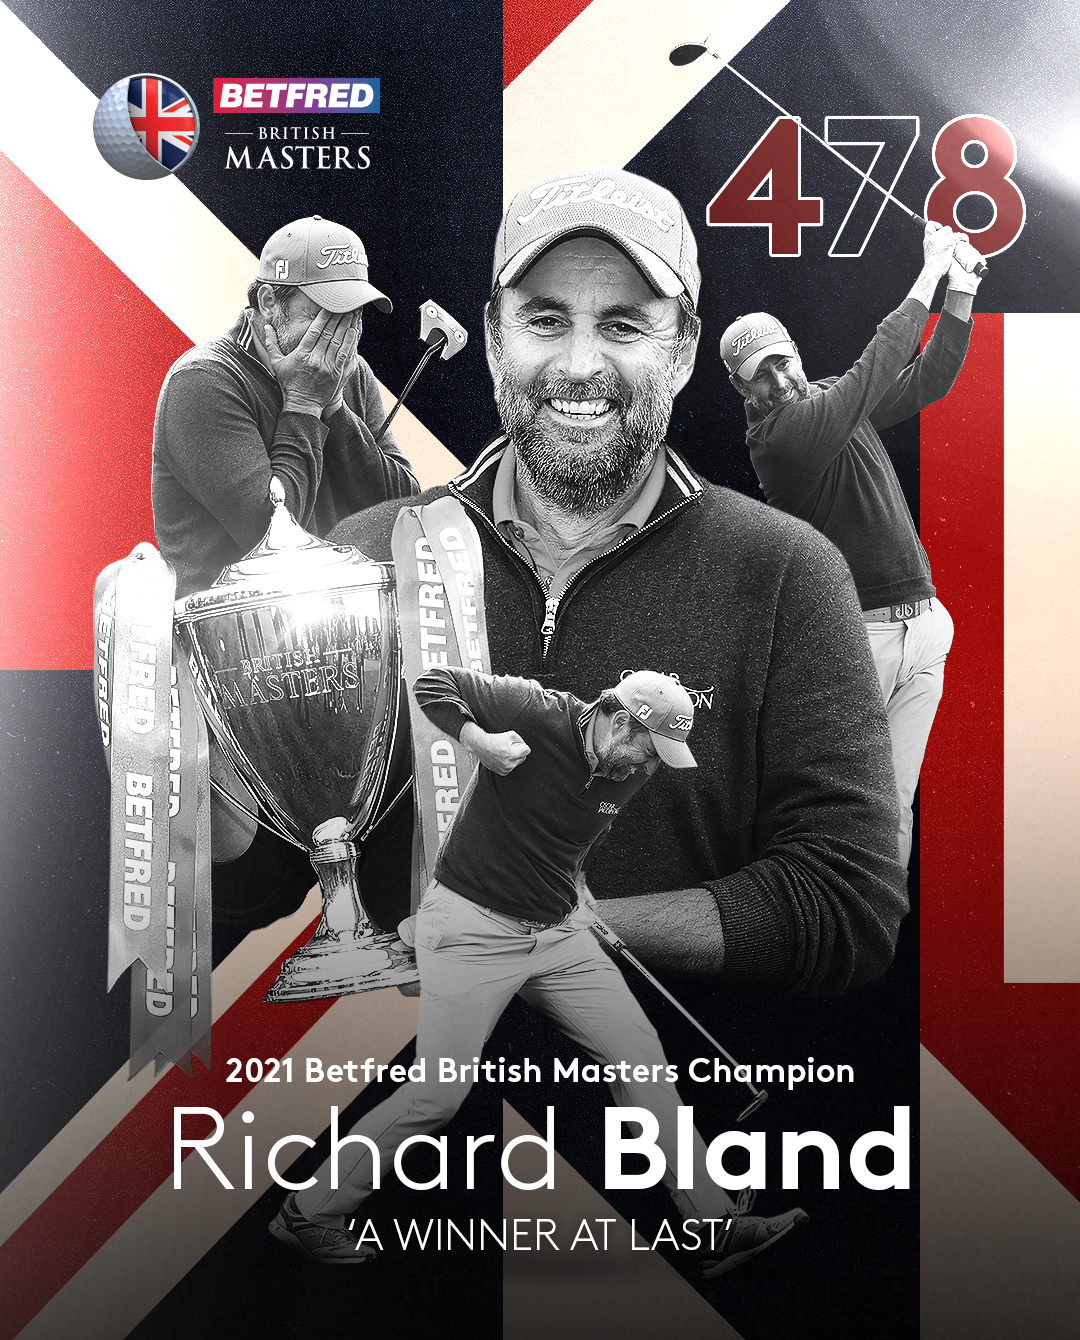 British Masters on Twitter "A winner at last. The oldest firsttime